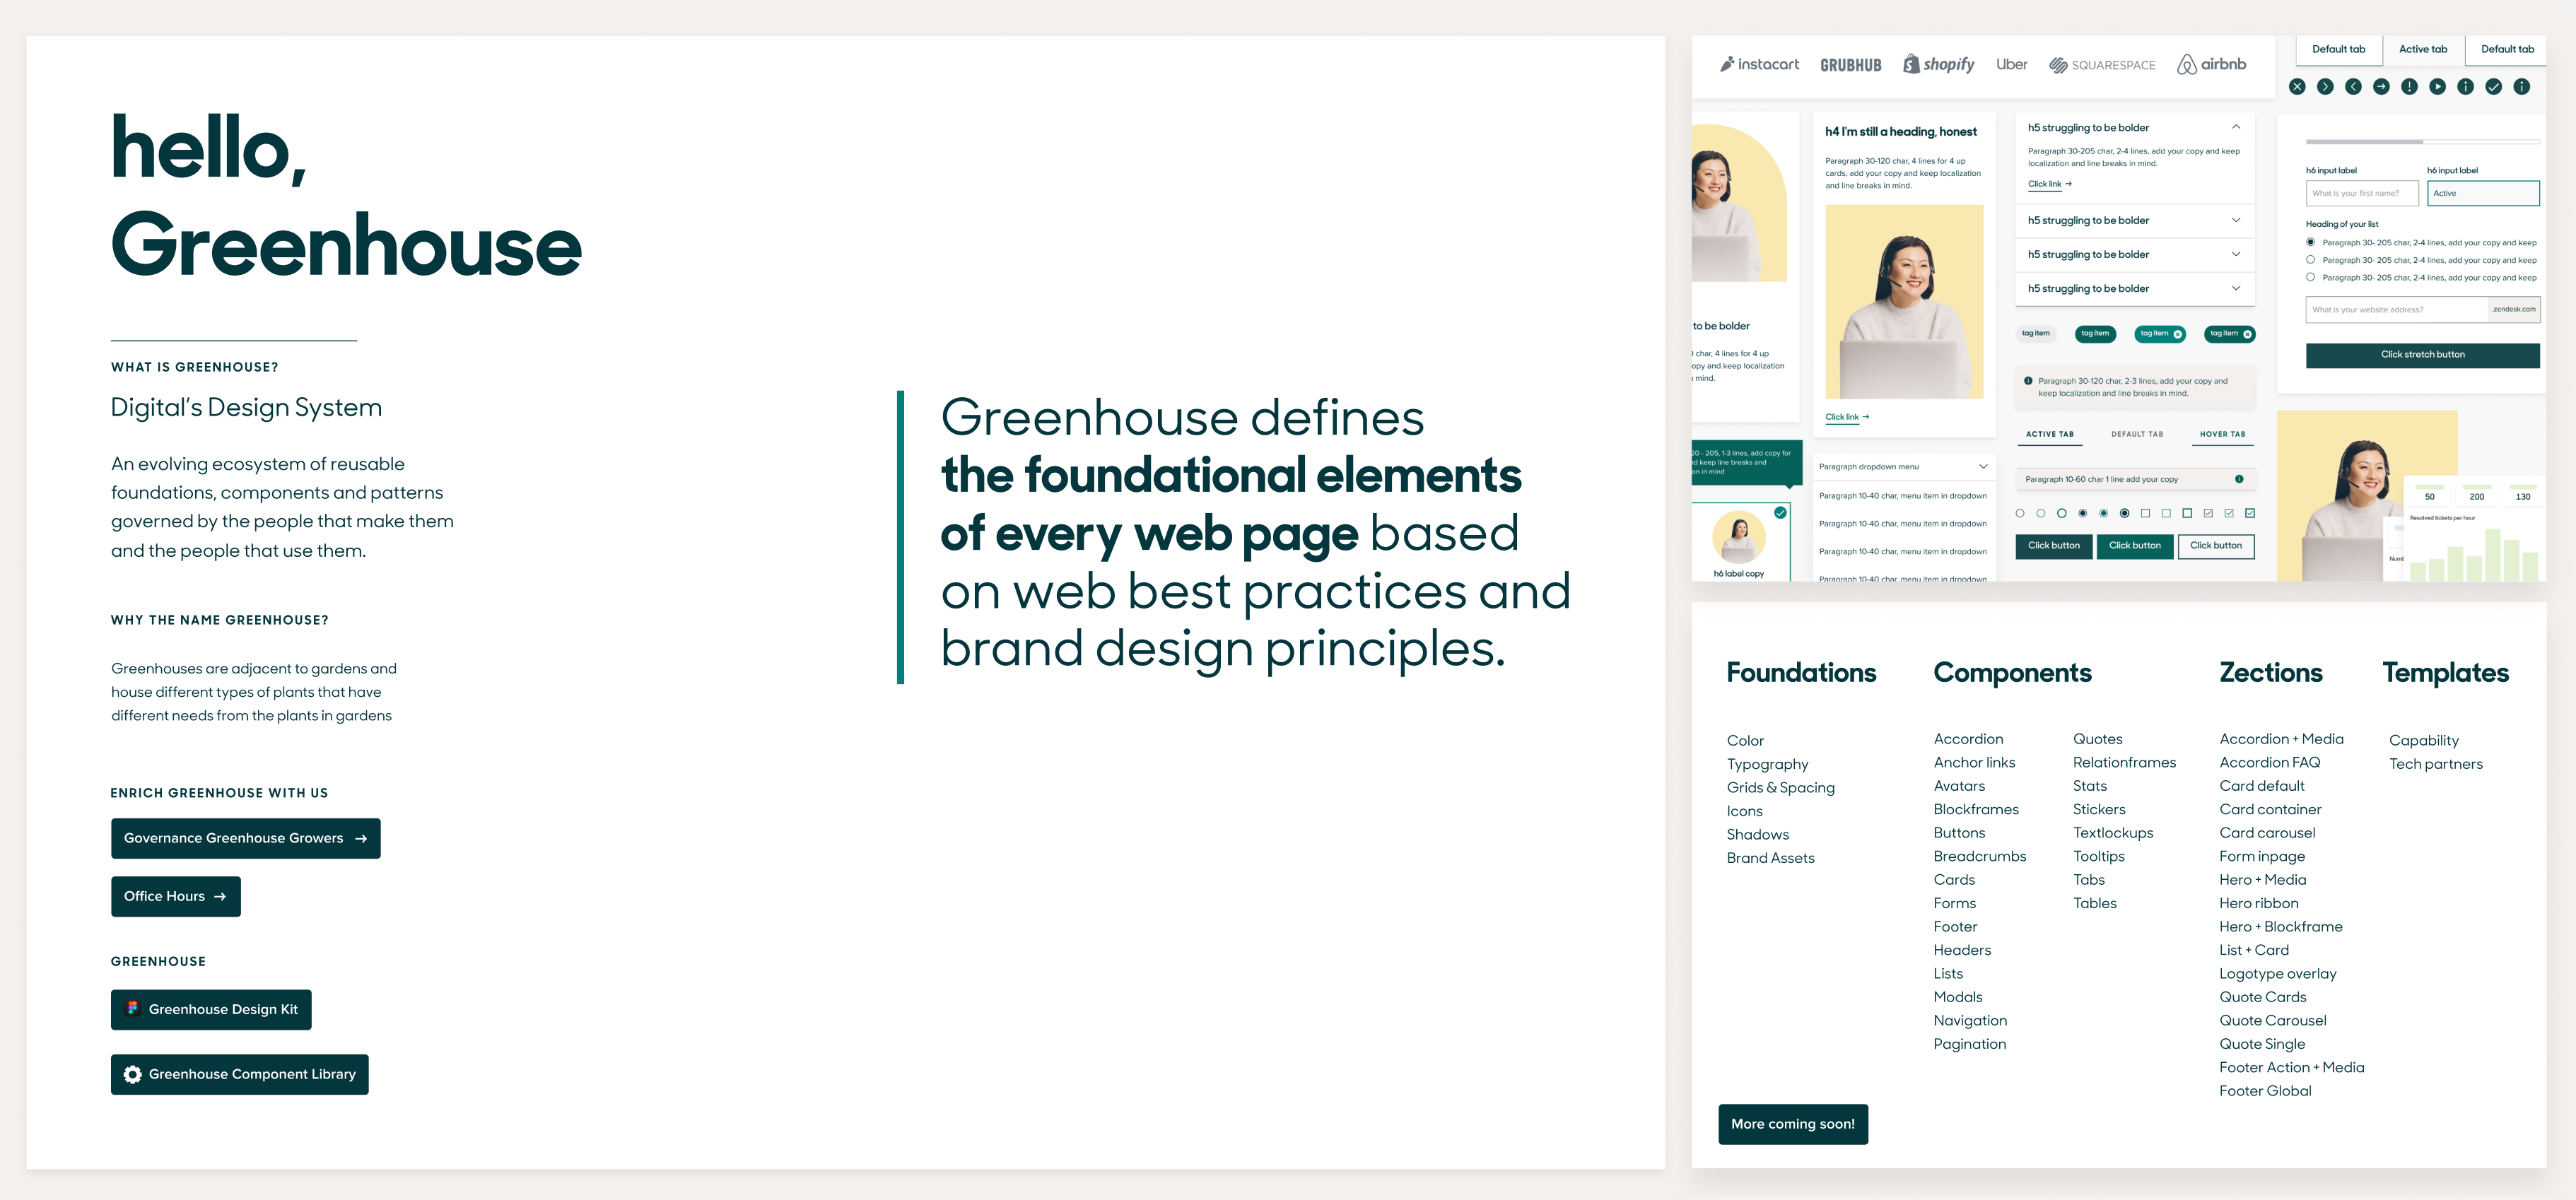 Greenhouse libary, purpose and resources